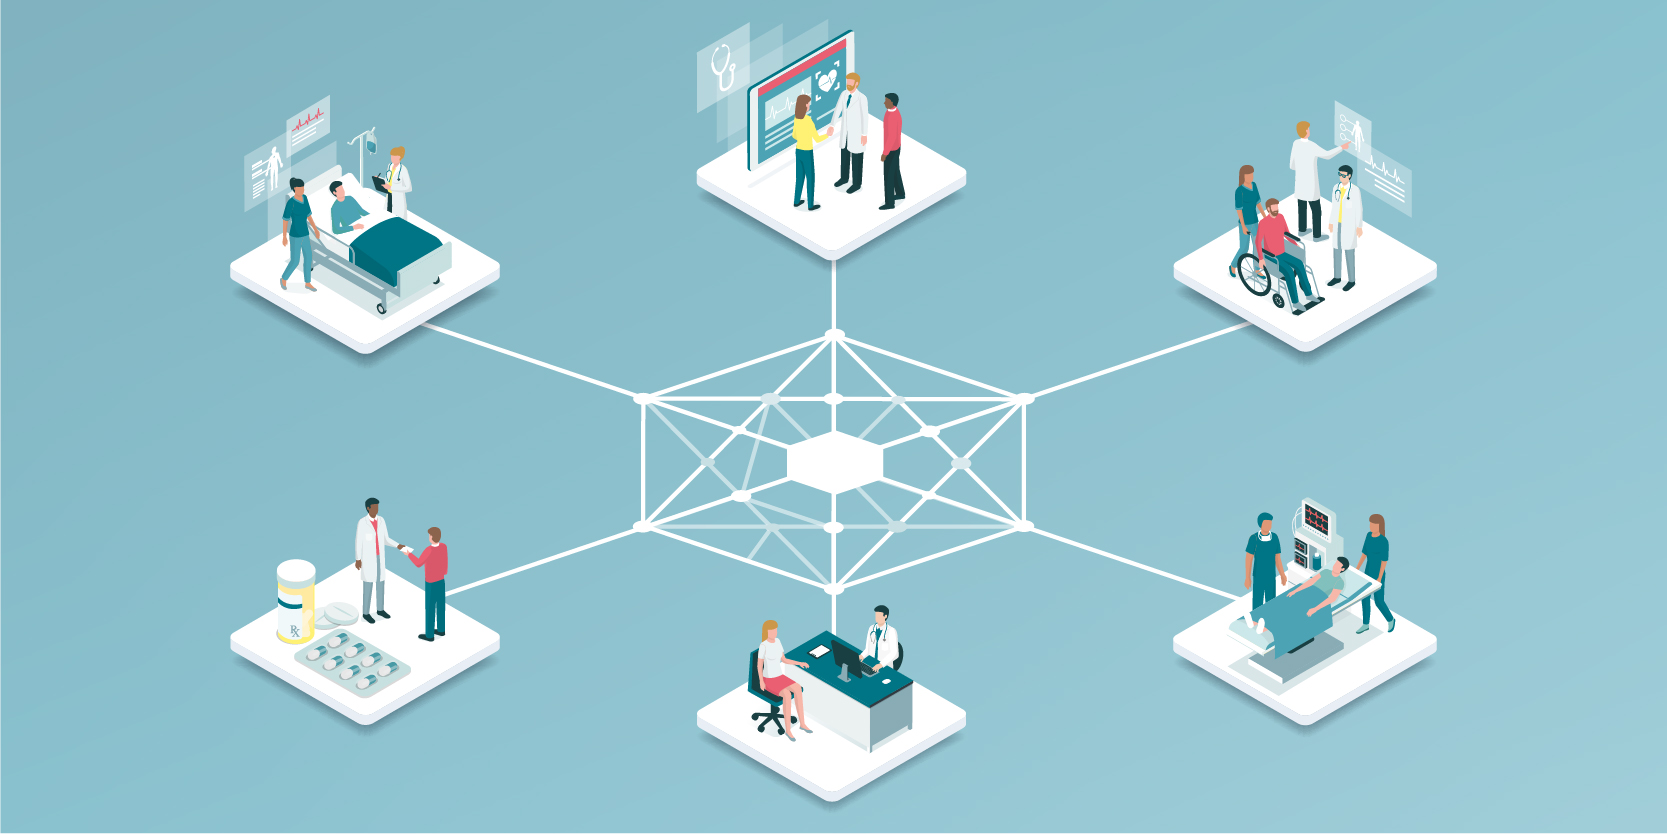 A hexagon web connects various platforms of medical inquiry, consultation, imaging, and medical advice, etc. in a graphic illustration form with small icons related to medical and hospital services.